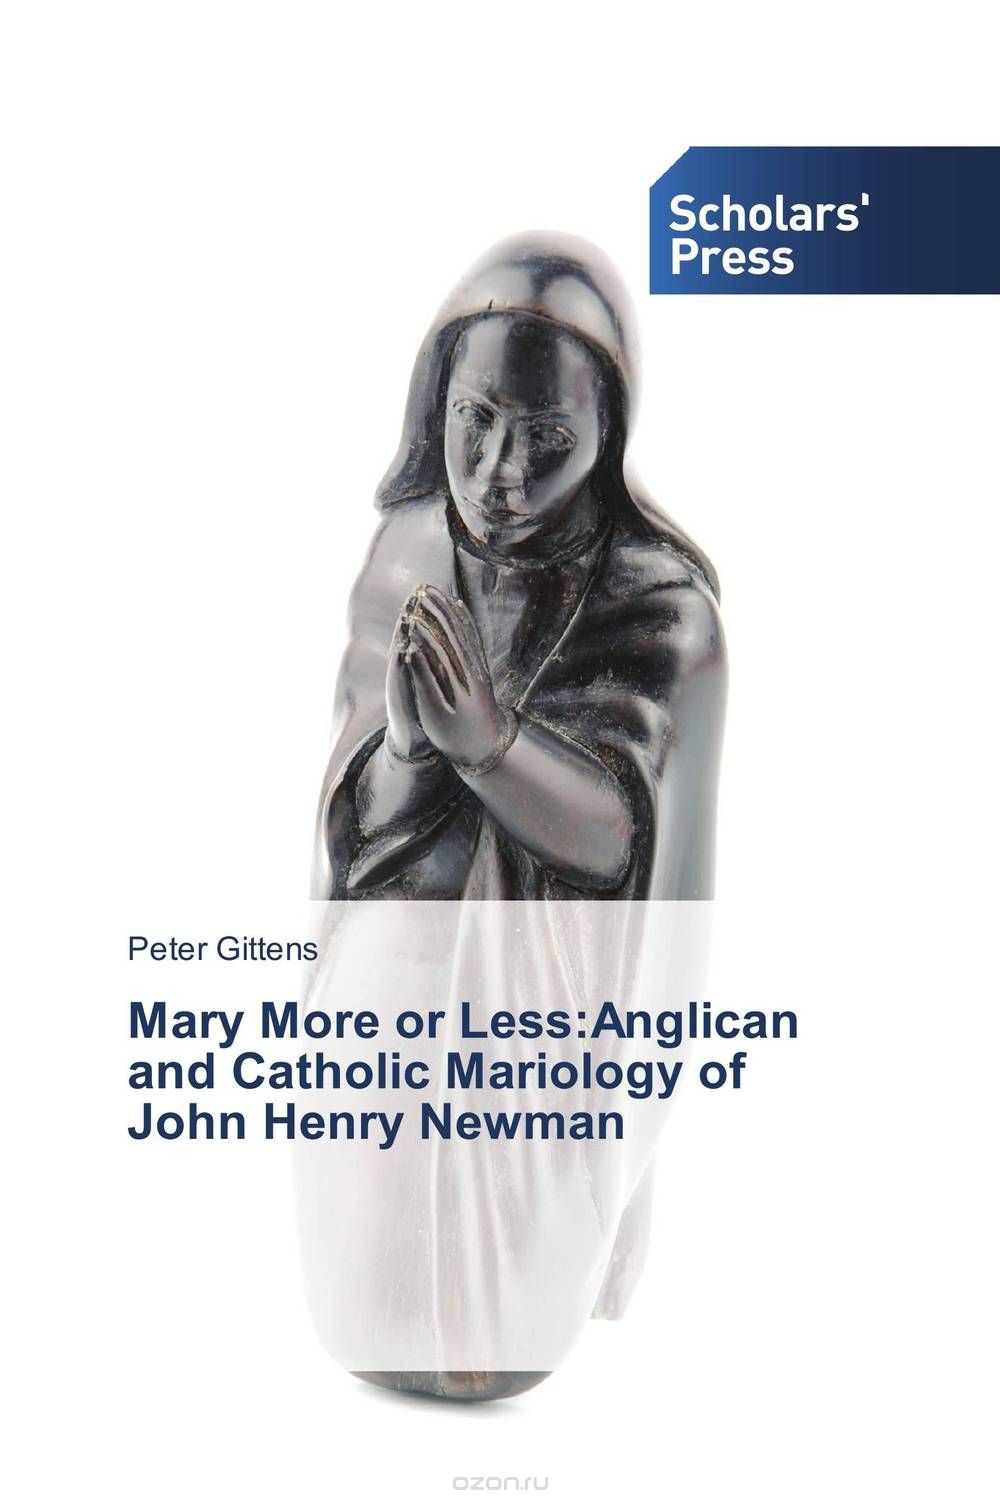 Скачать книгу "Mary More or Less:Anglican and Catholic Mariology of John Henry Newman"